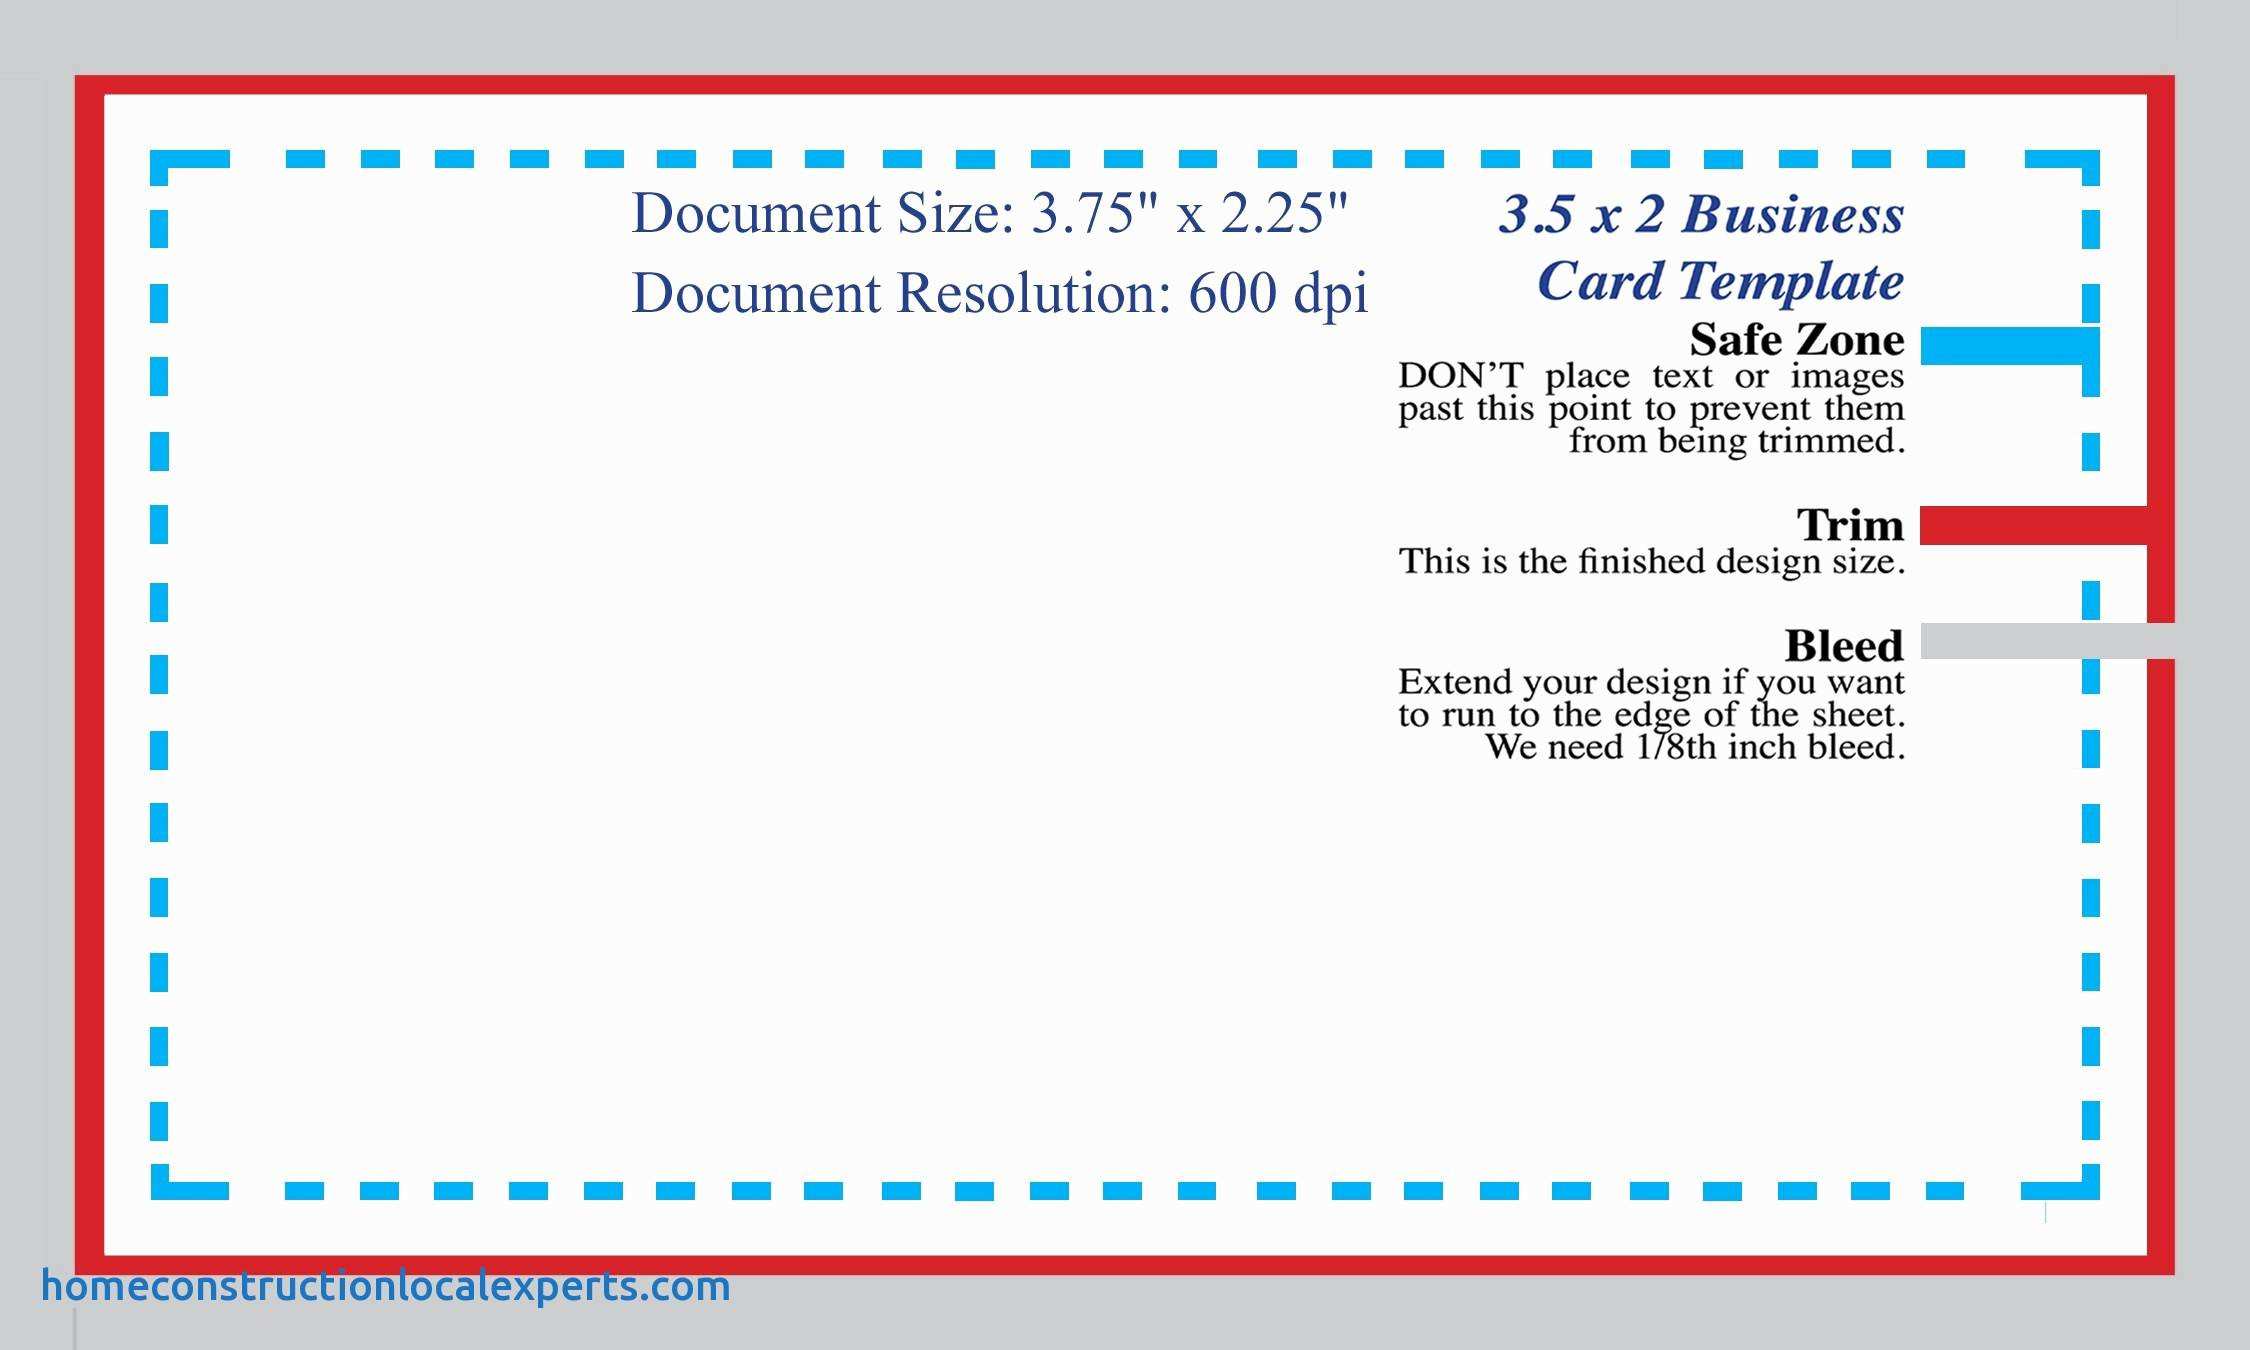 free-avery-business-card-template-28371-cards-design-templates